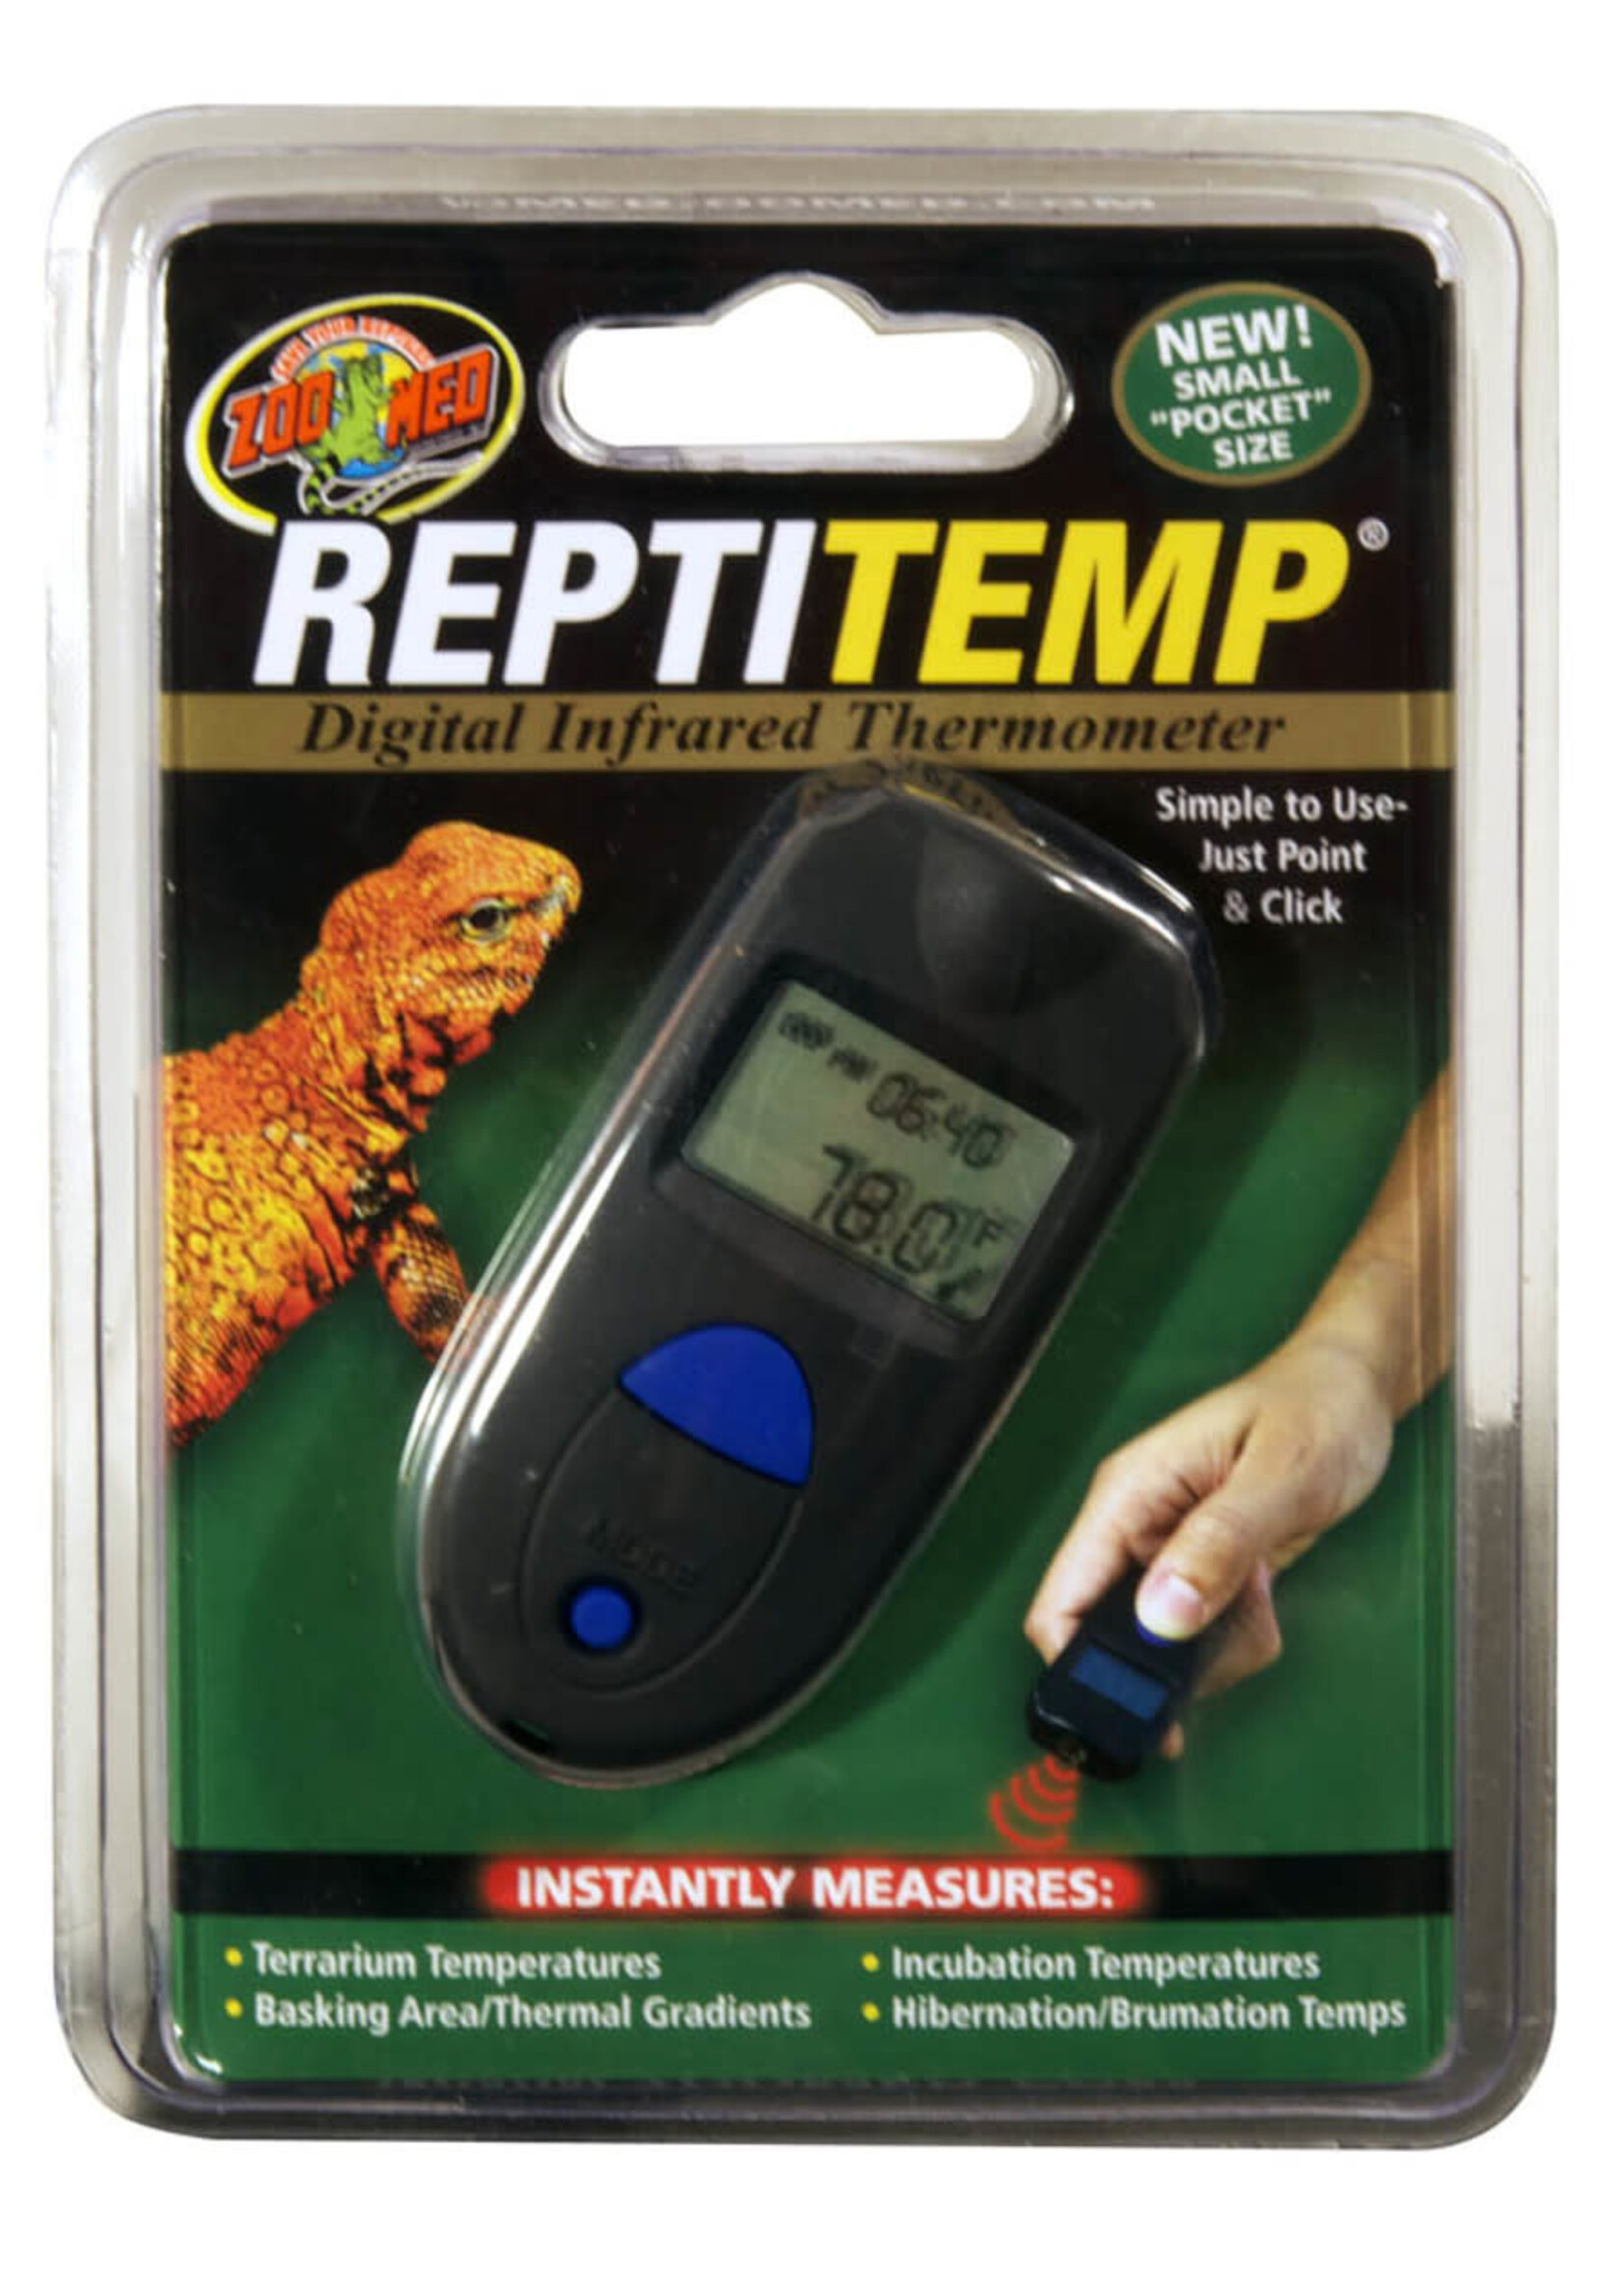 Zoo Med REPTITEMP DIGTAL INFRARED THERMOMETER